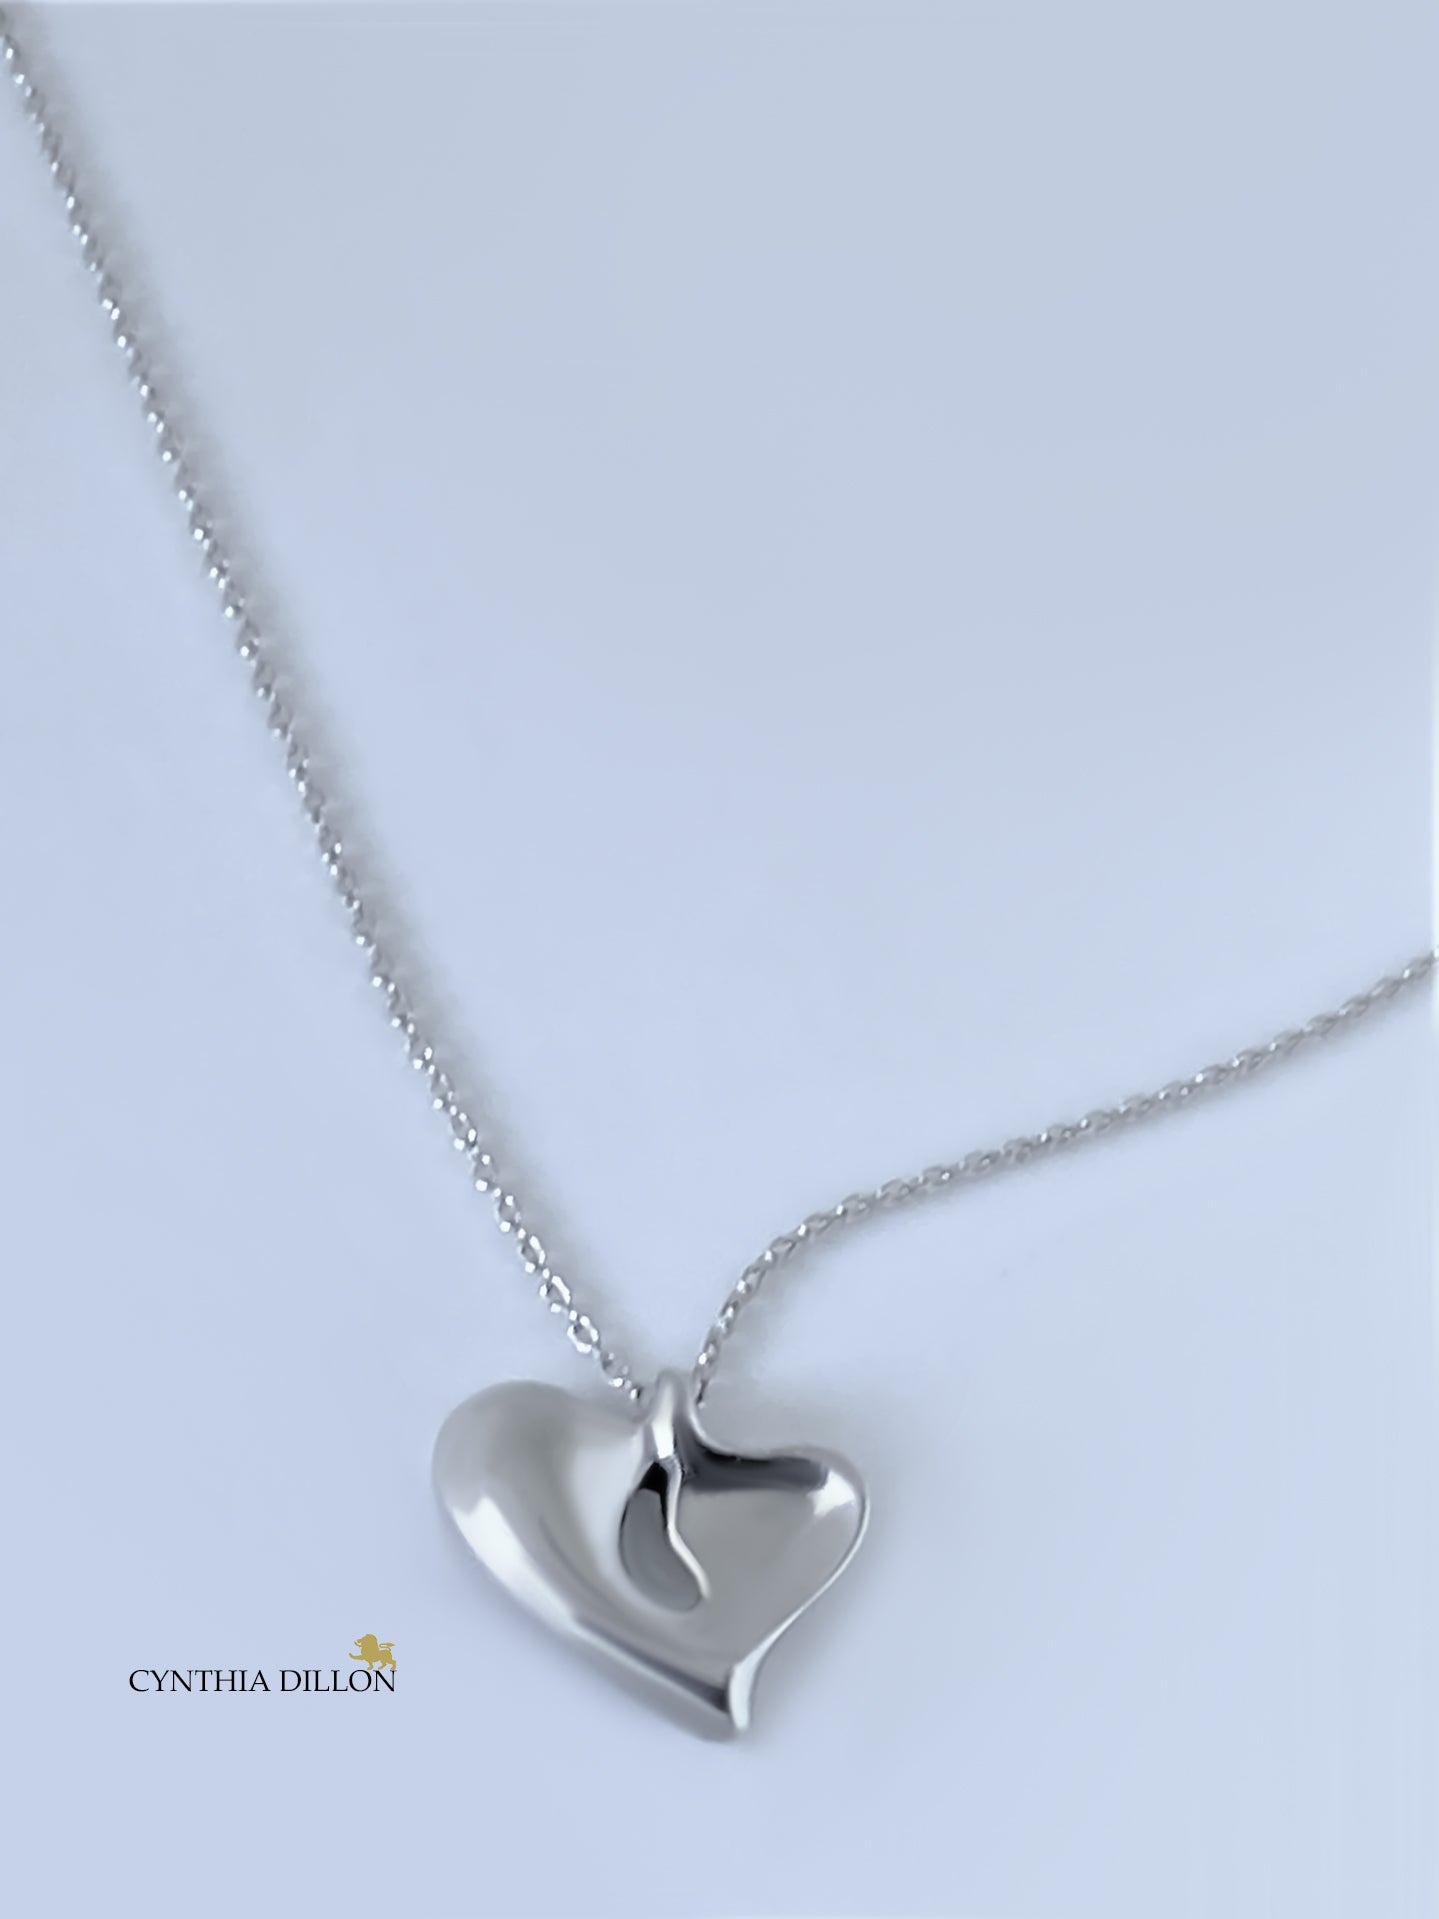 Pendant - Sculpted "Closed Heart w. Tear" in S/S w. 16" Chain. (Sm)